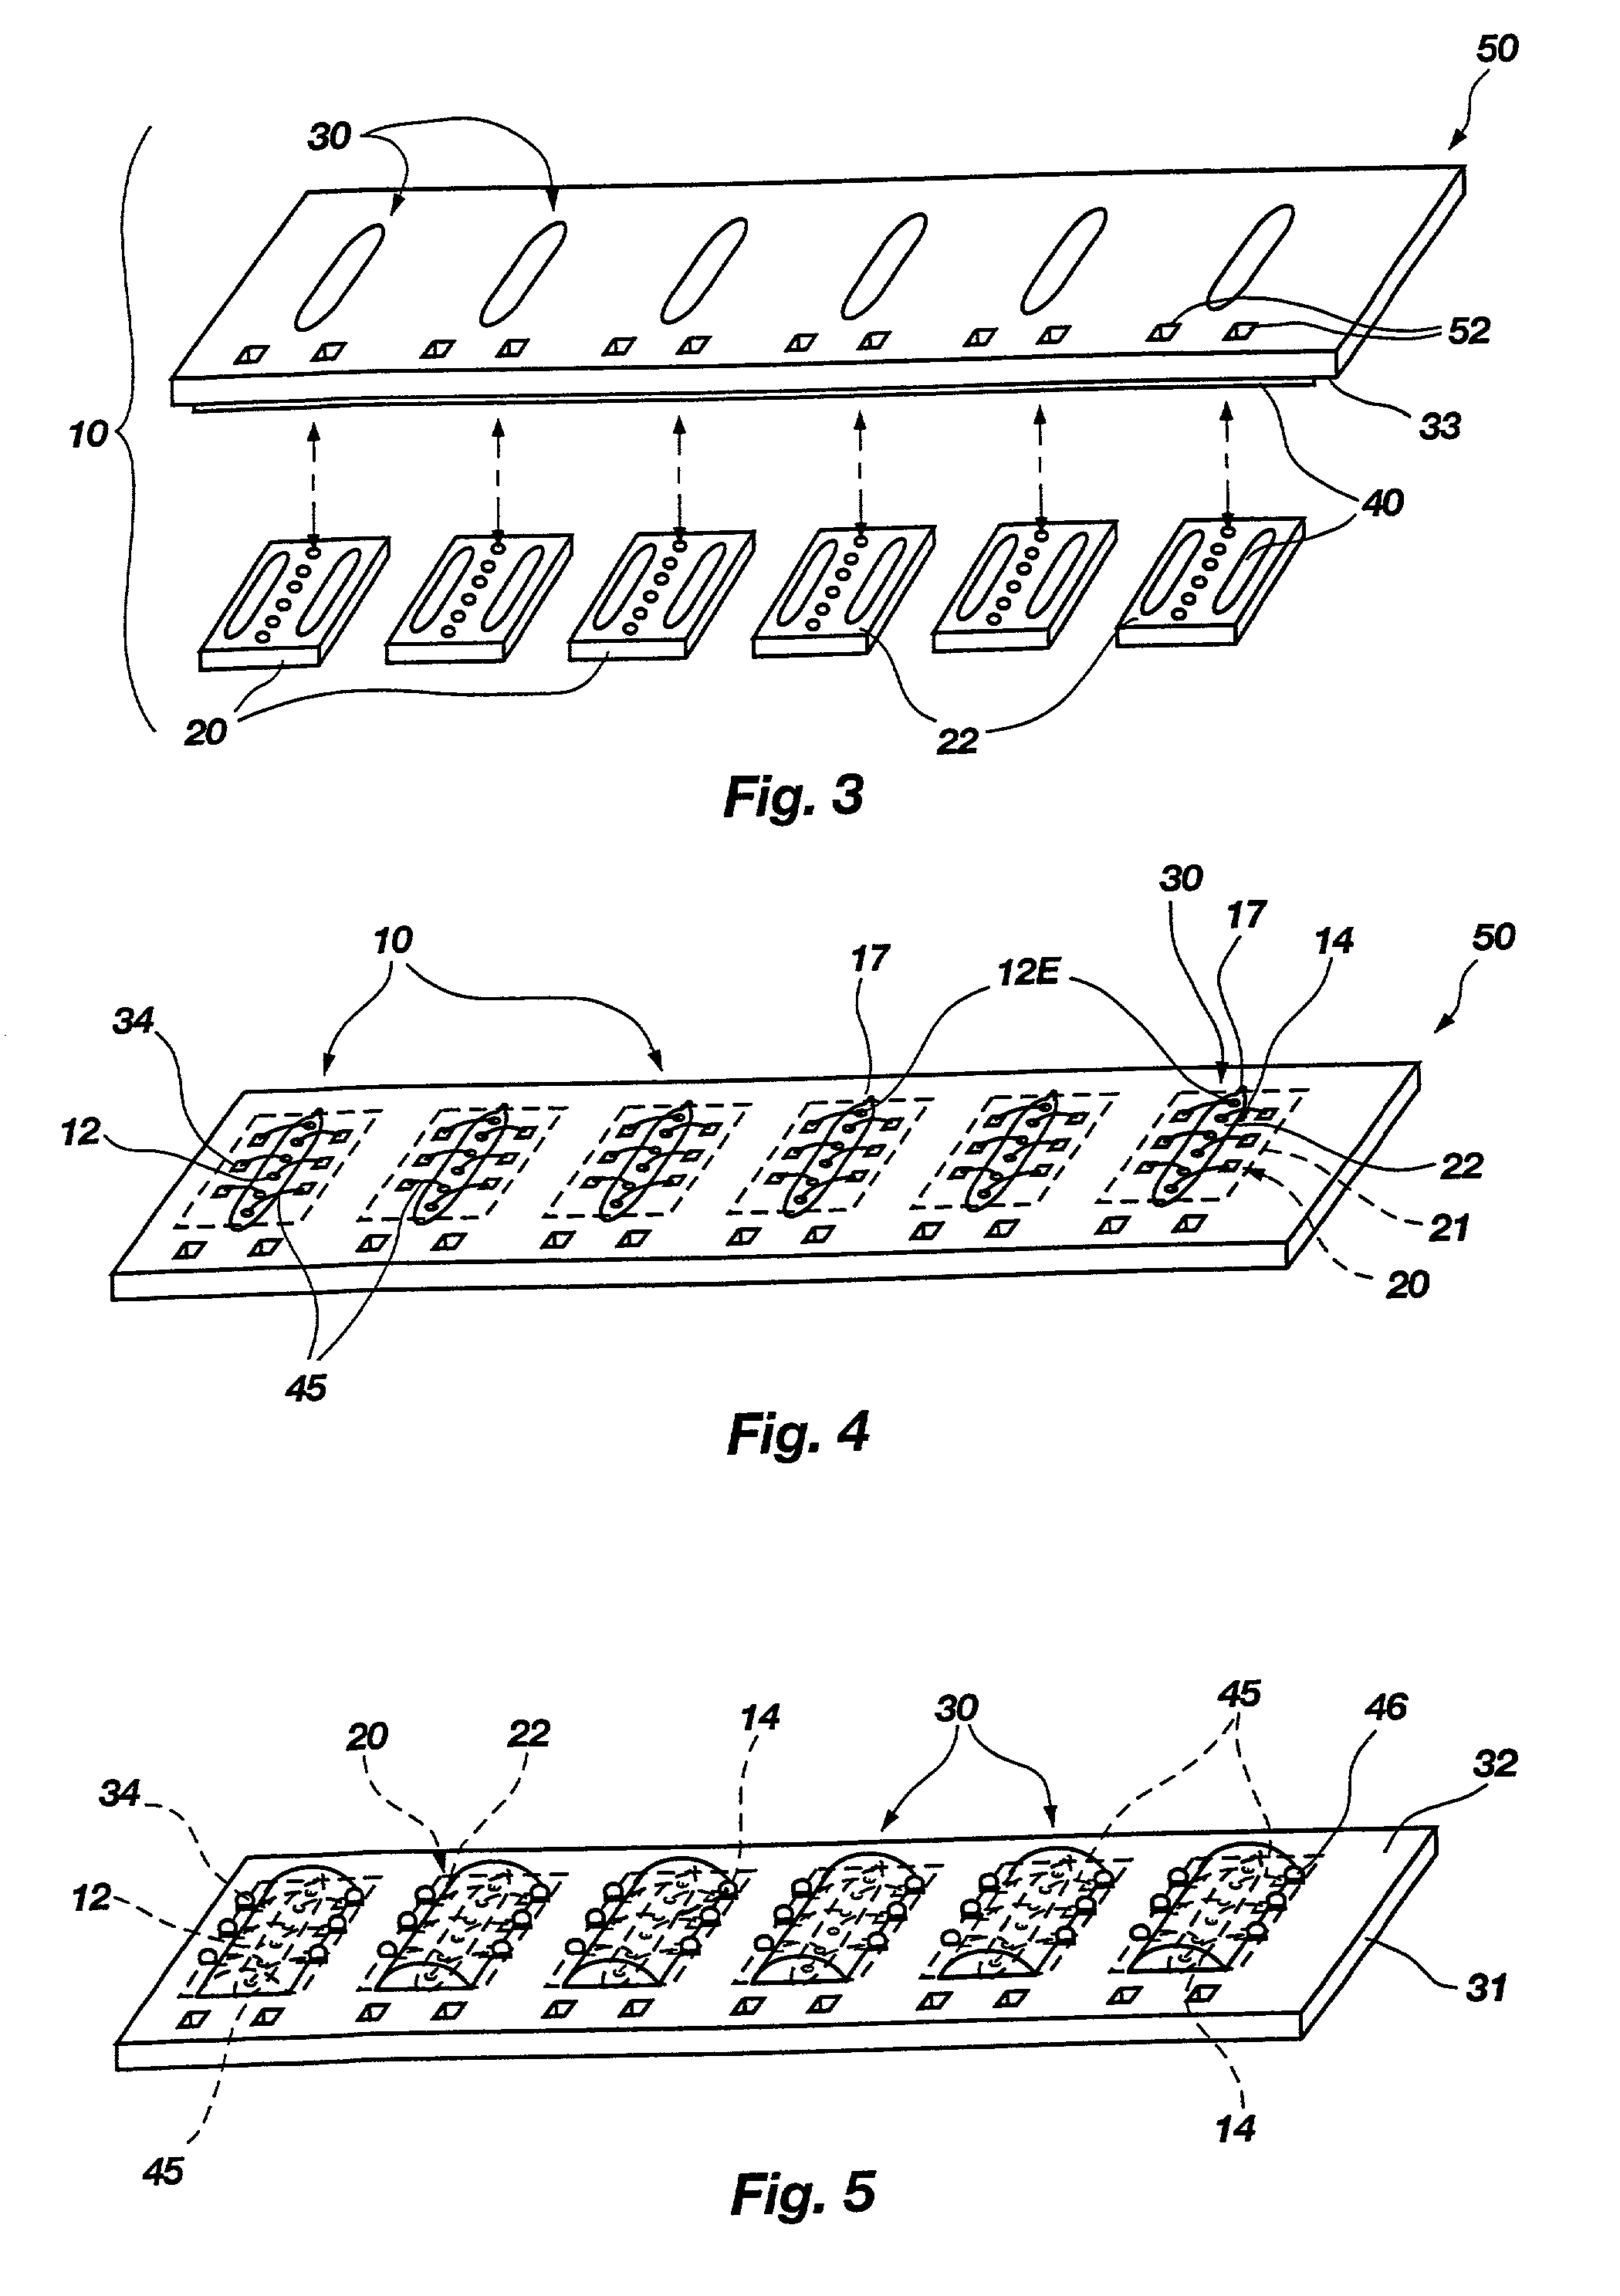 Interposer, packages including the interposer, and methods